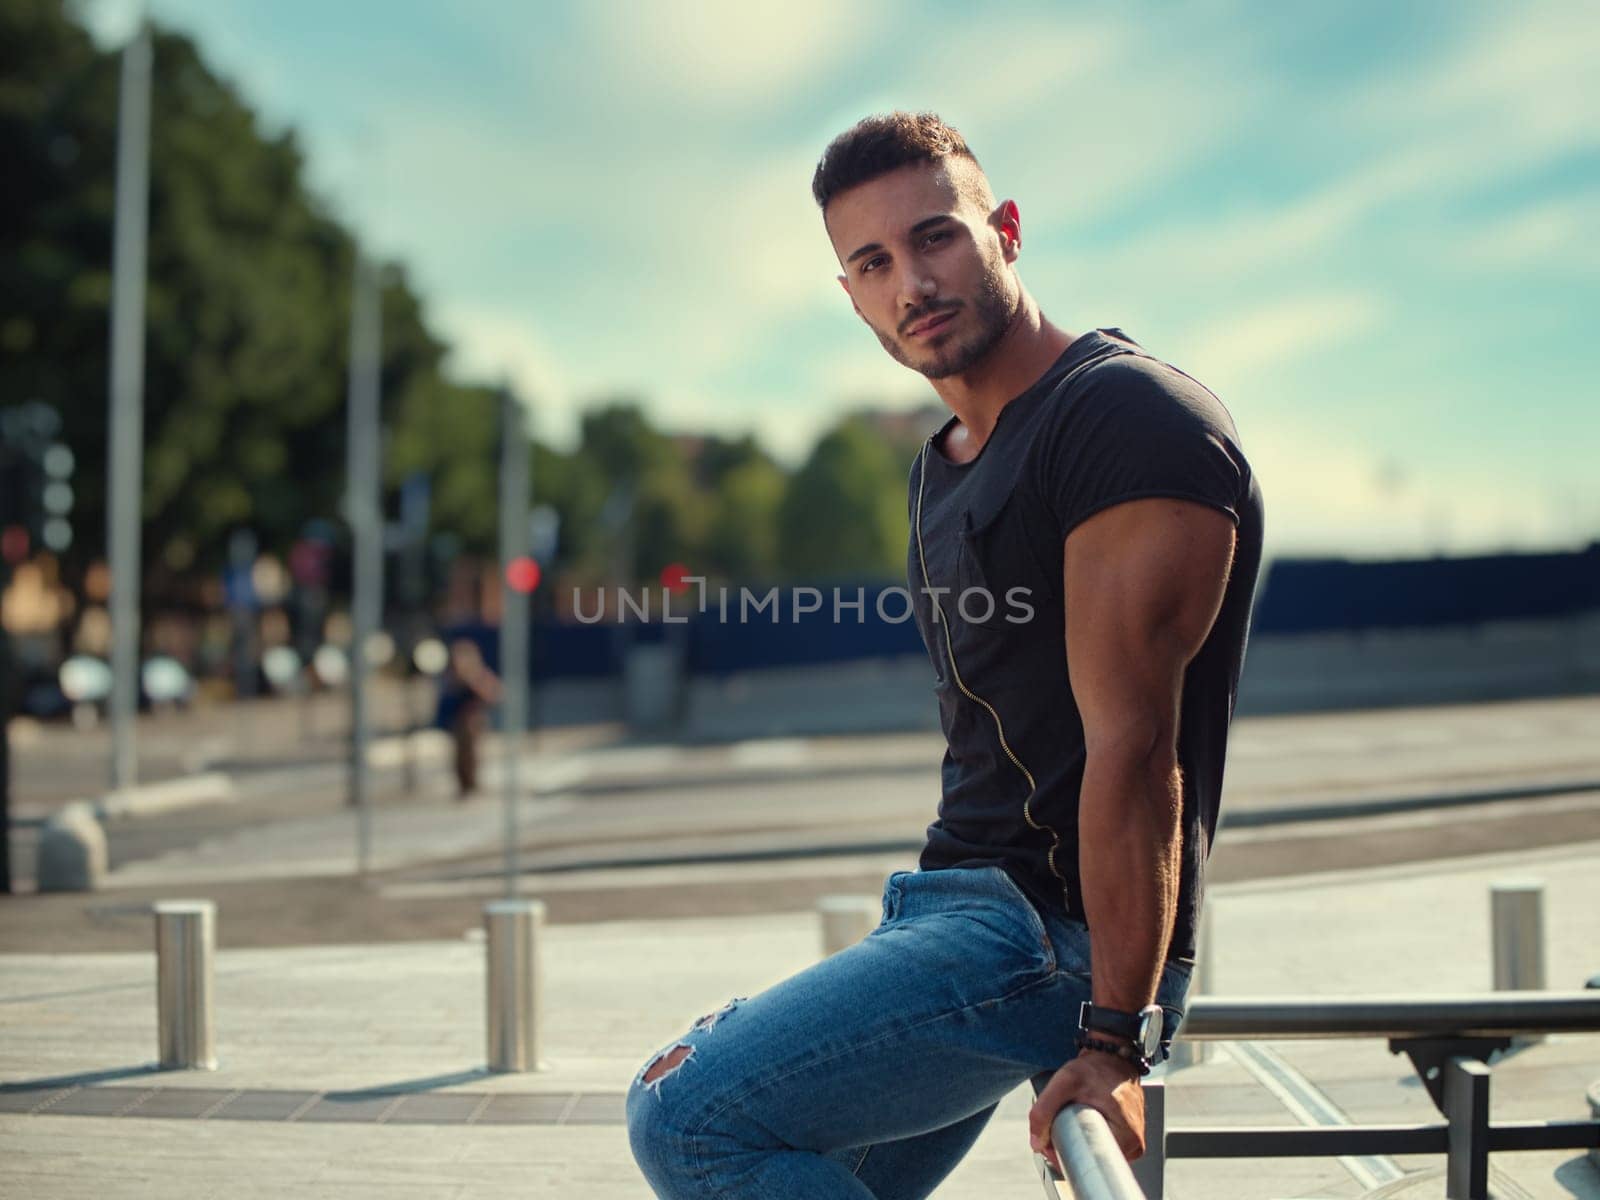 A man is seated on the metal bench, looking out into the distance. He appears relaxed and thoughtful as he takes in the surroundings.